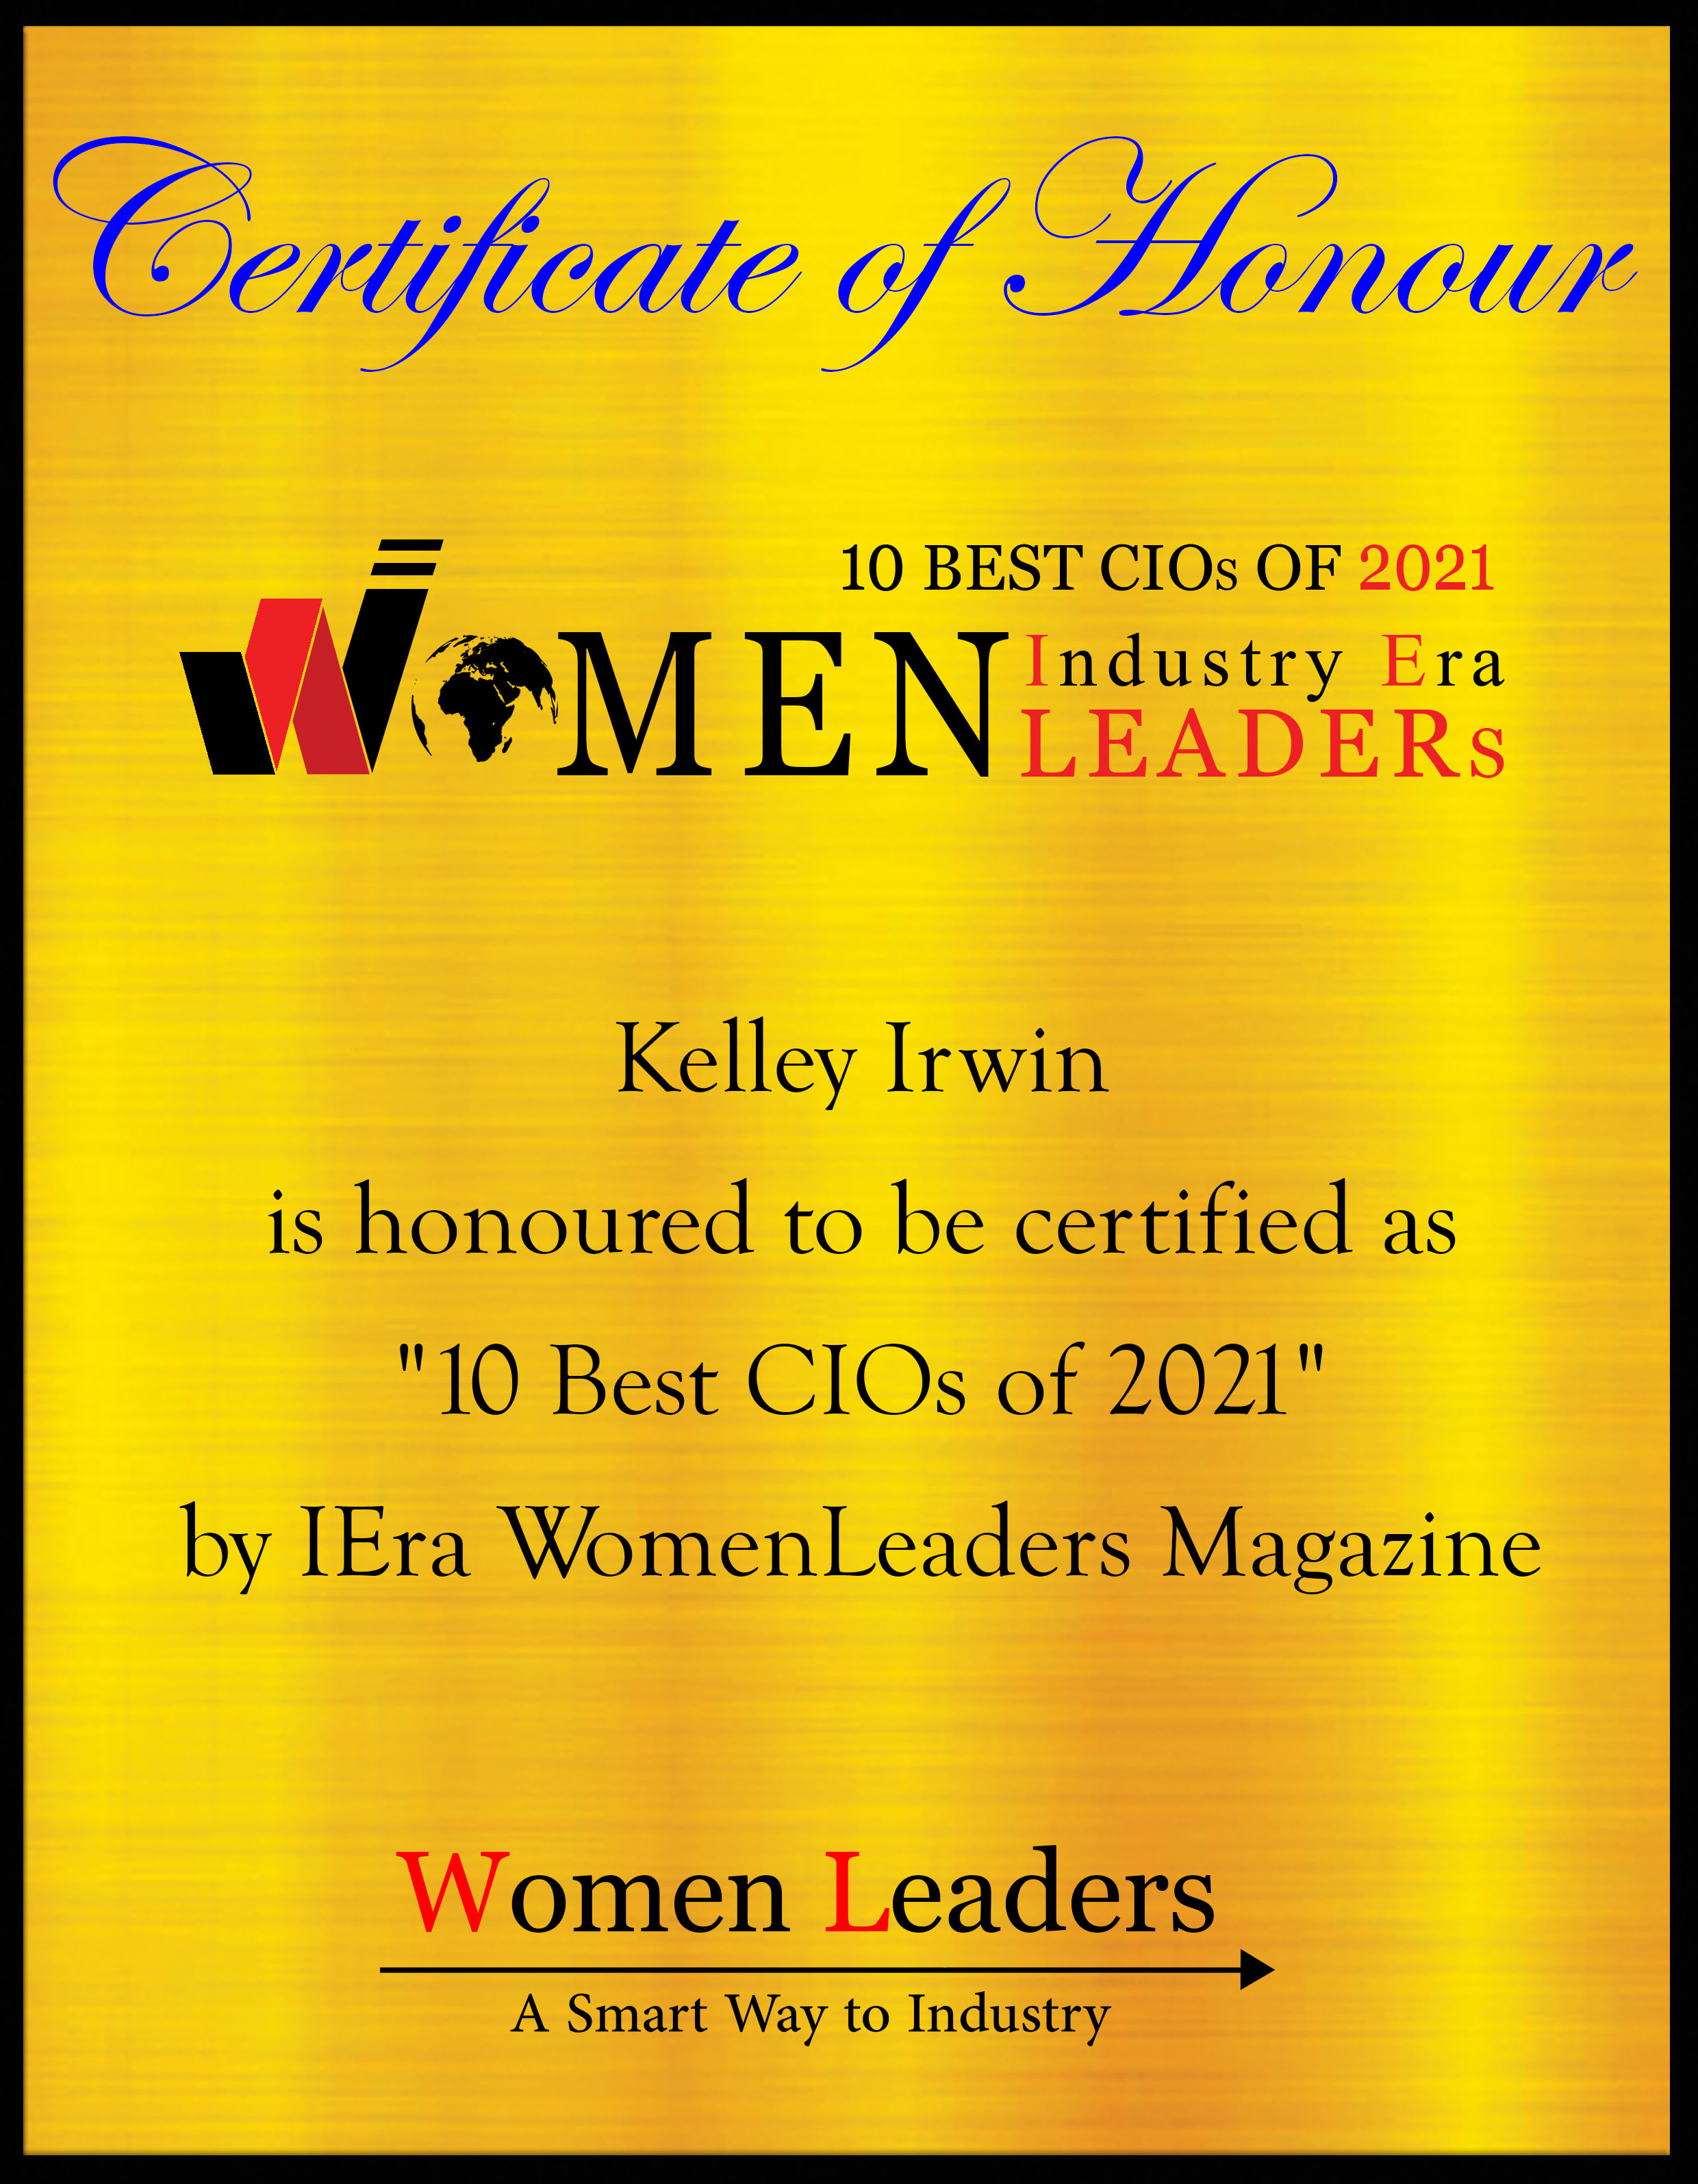 Kelley Irwin, CIO of Electrical Safety Authority, Best CIOs of 2021